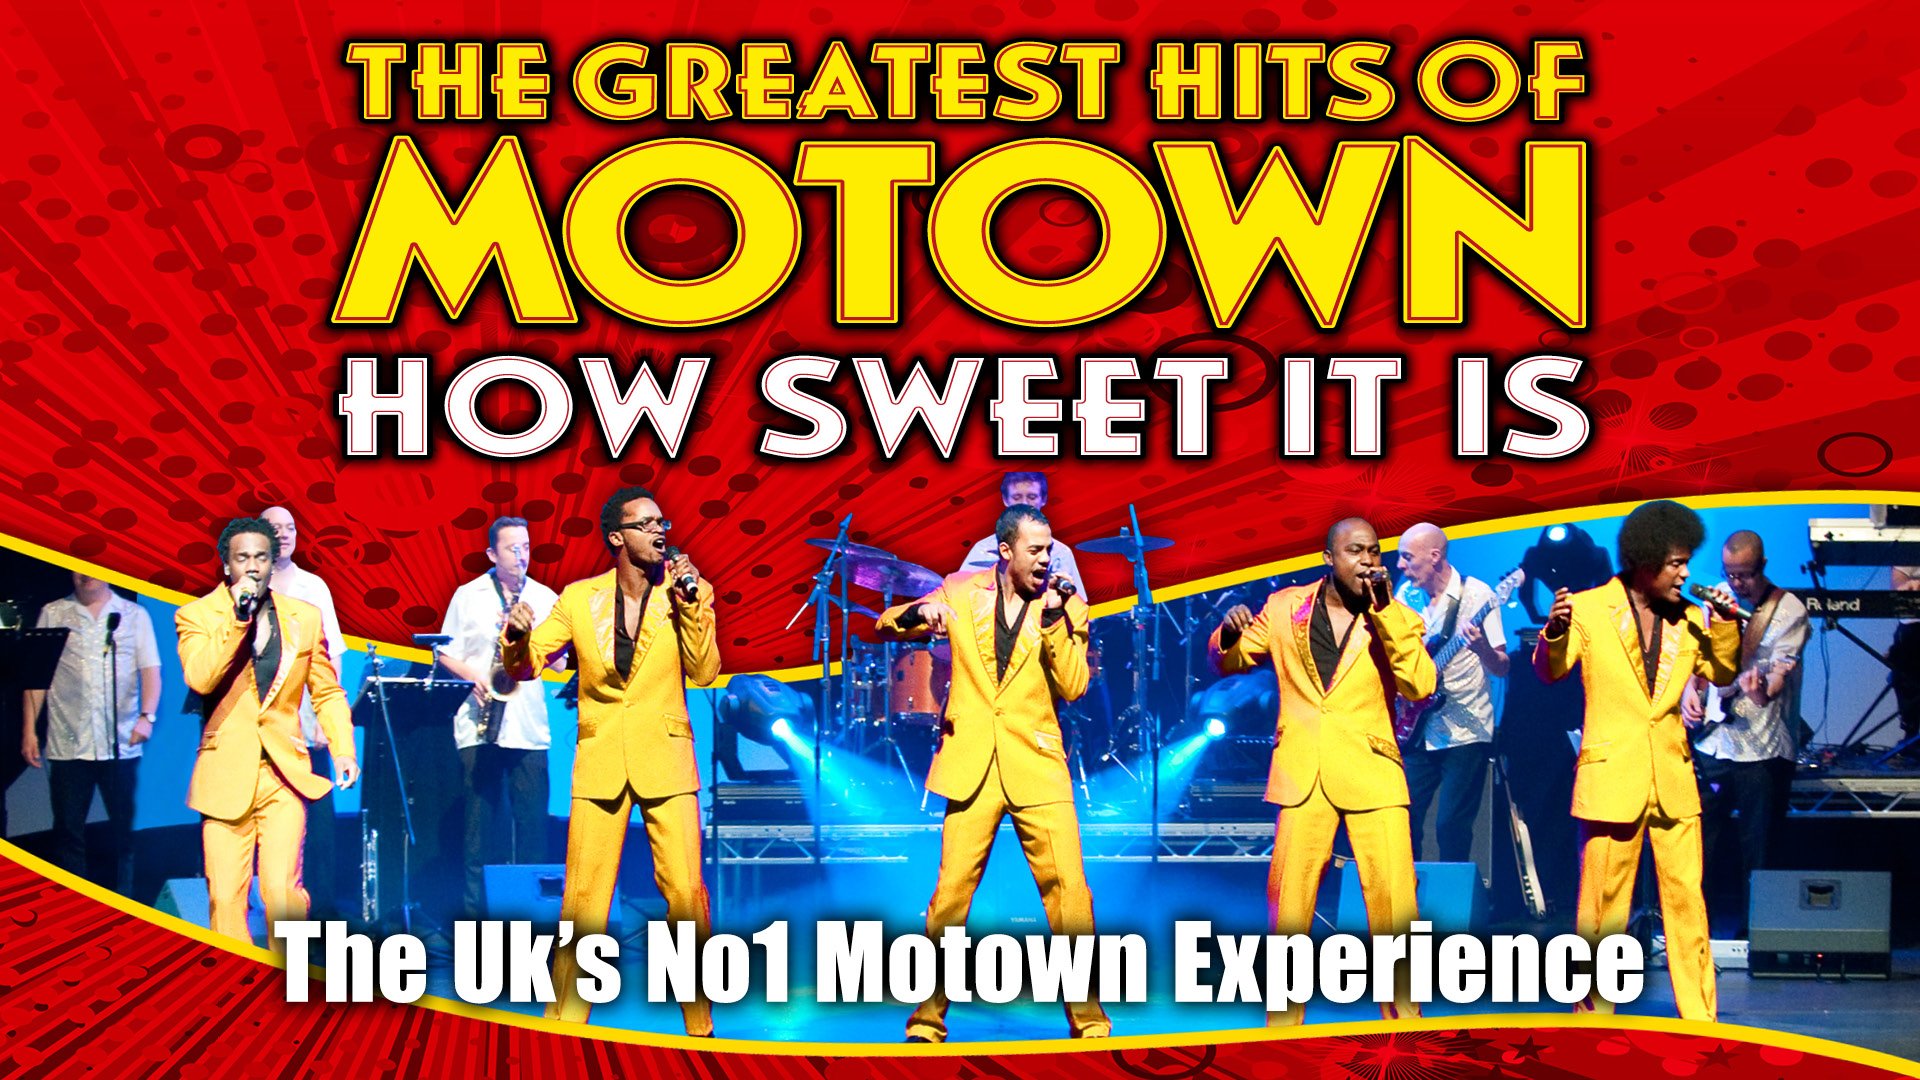 The Greatest Hits of Motown – How Sweet It Is Top Image